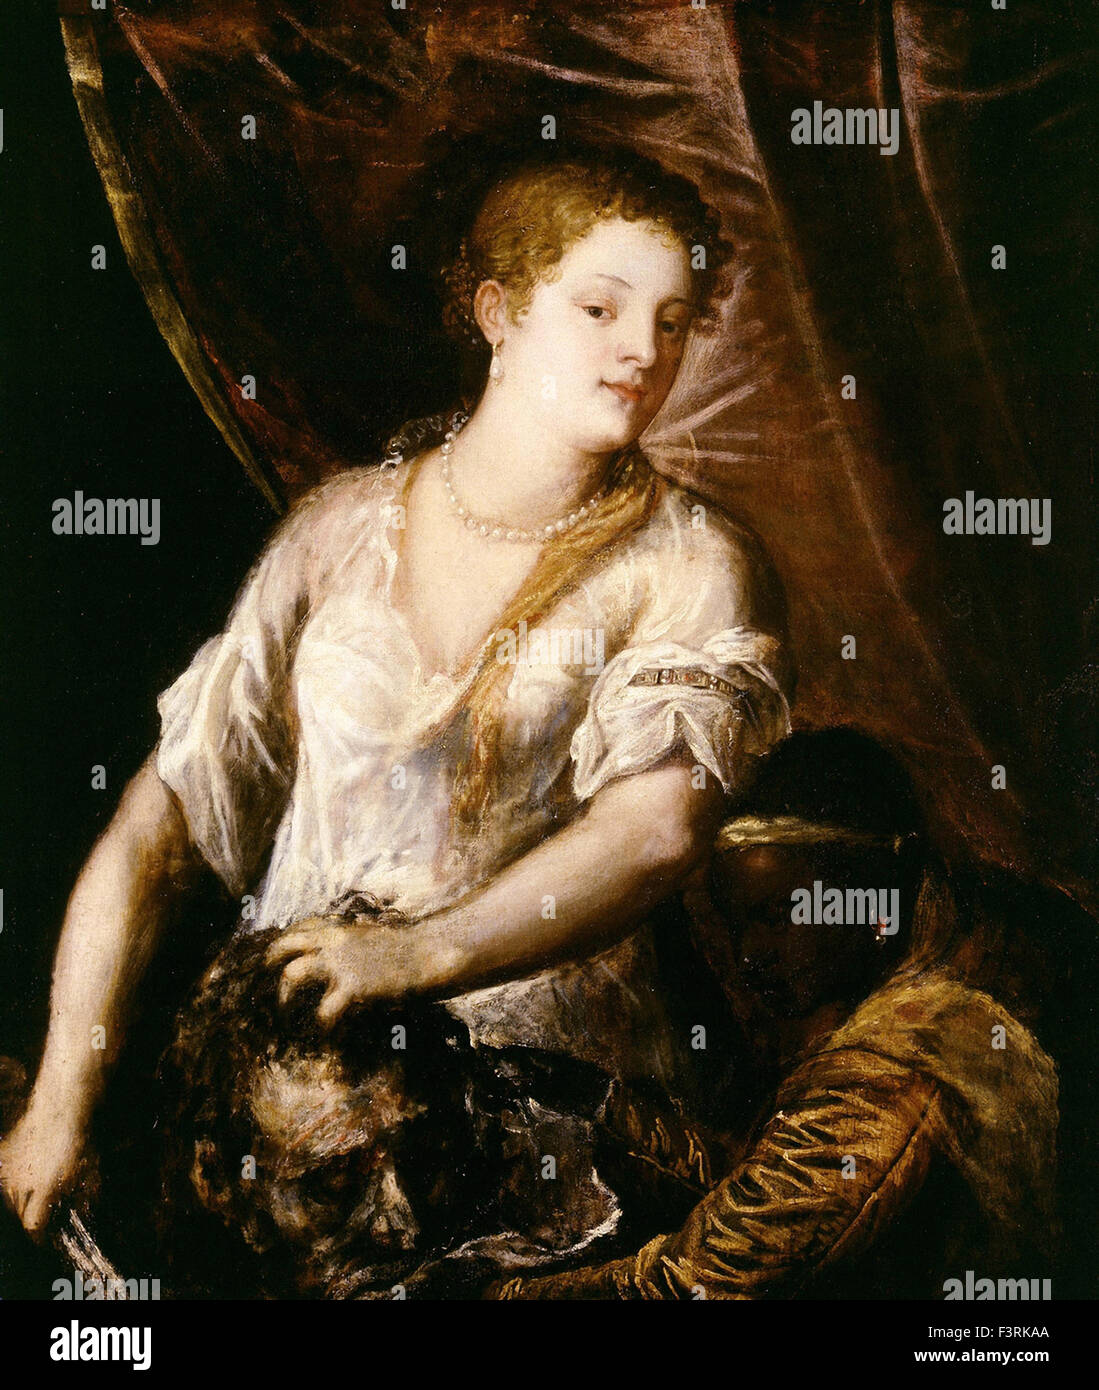 Tiziano Vecellio - Titian - Judith with the Head of Holofernes Stock Photo